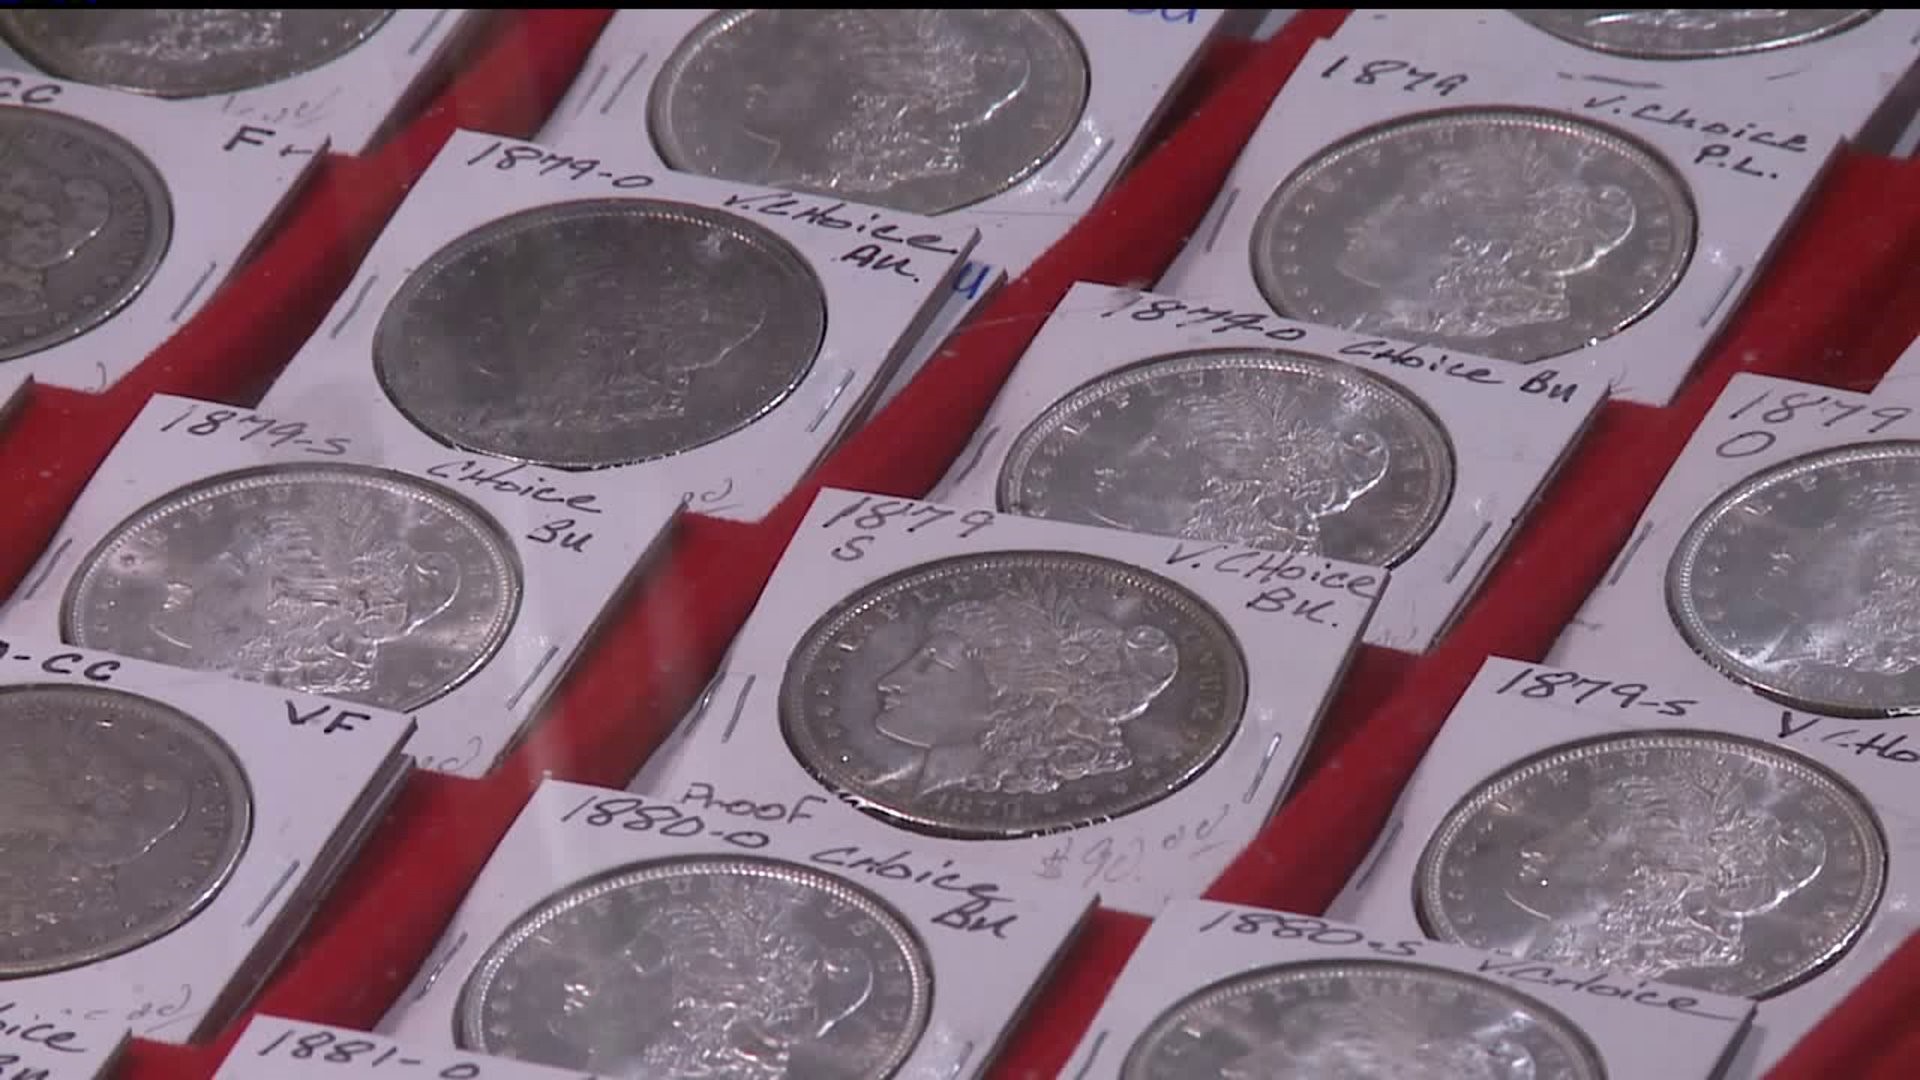 Annual Spring Coin Show celebrates 80 years